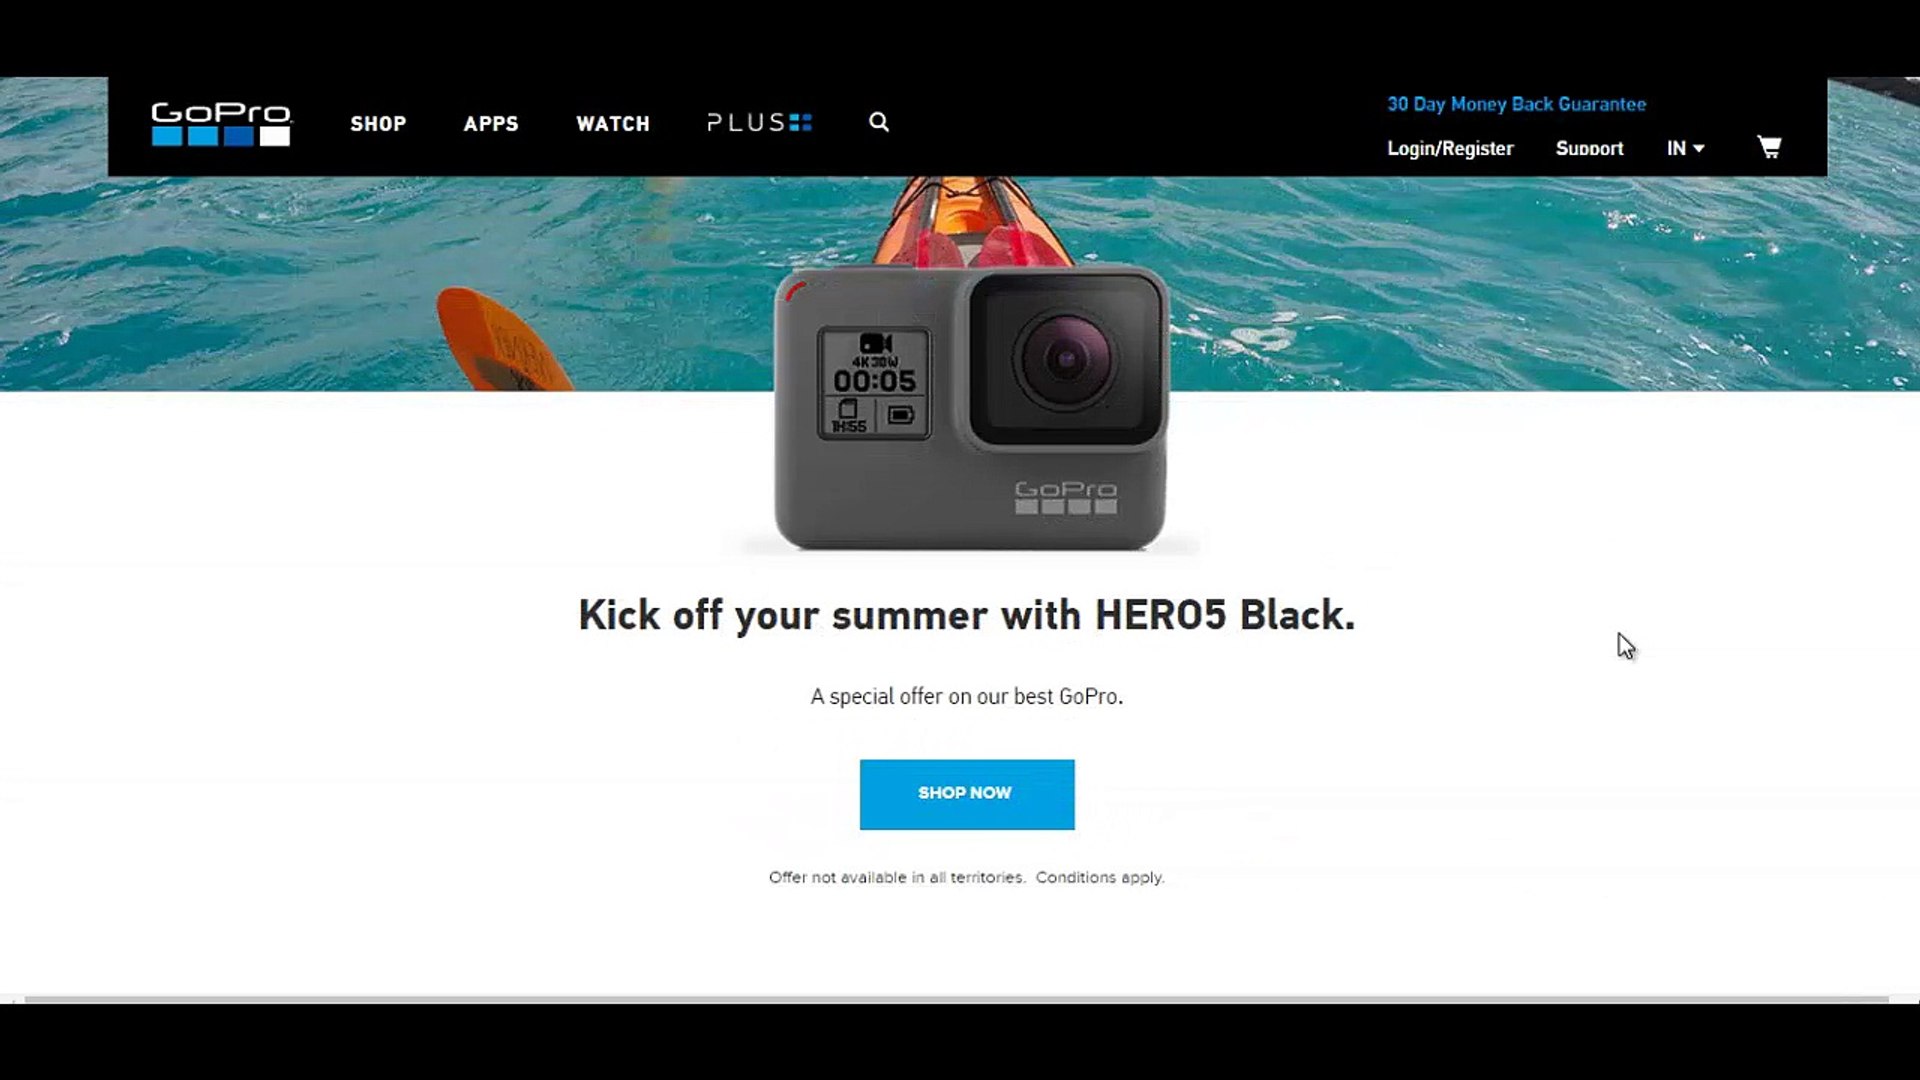 A special summer offer on our best GoPro HERO5 Black - video Dailymotion